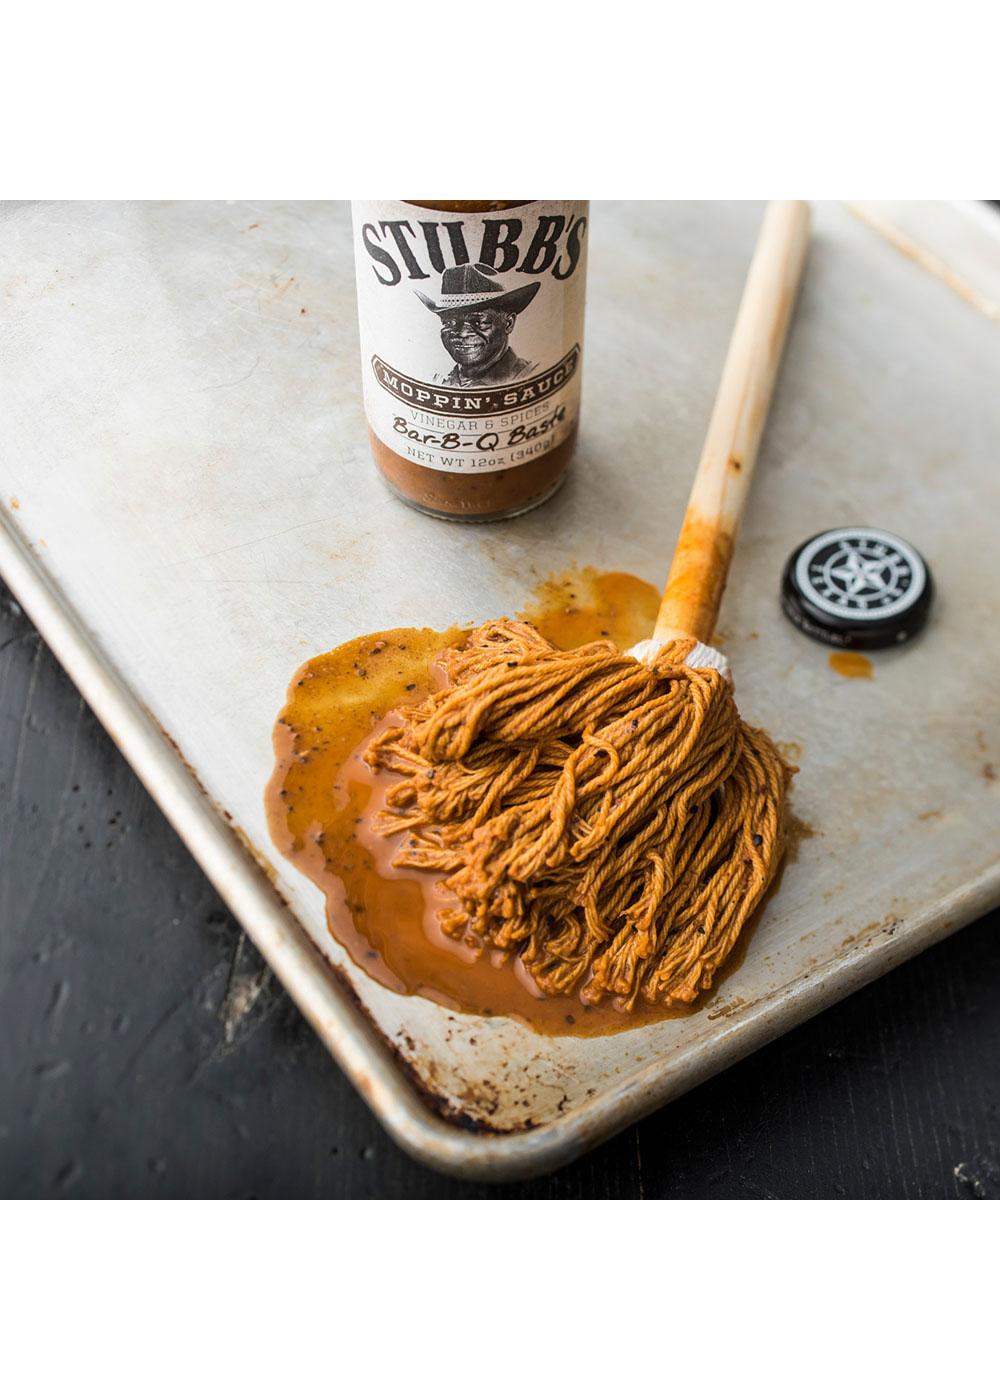 Stubb's Moppin' Sauce Barbecue Baste; image 9 of 9